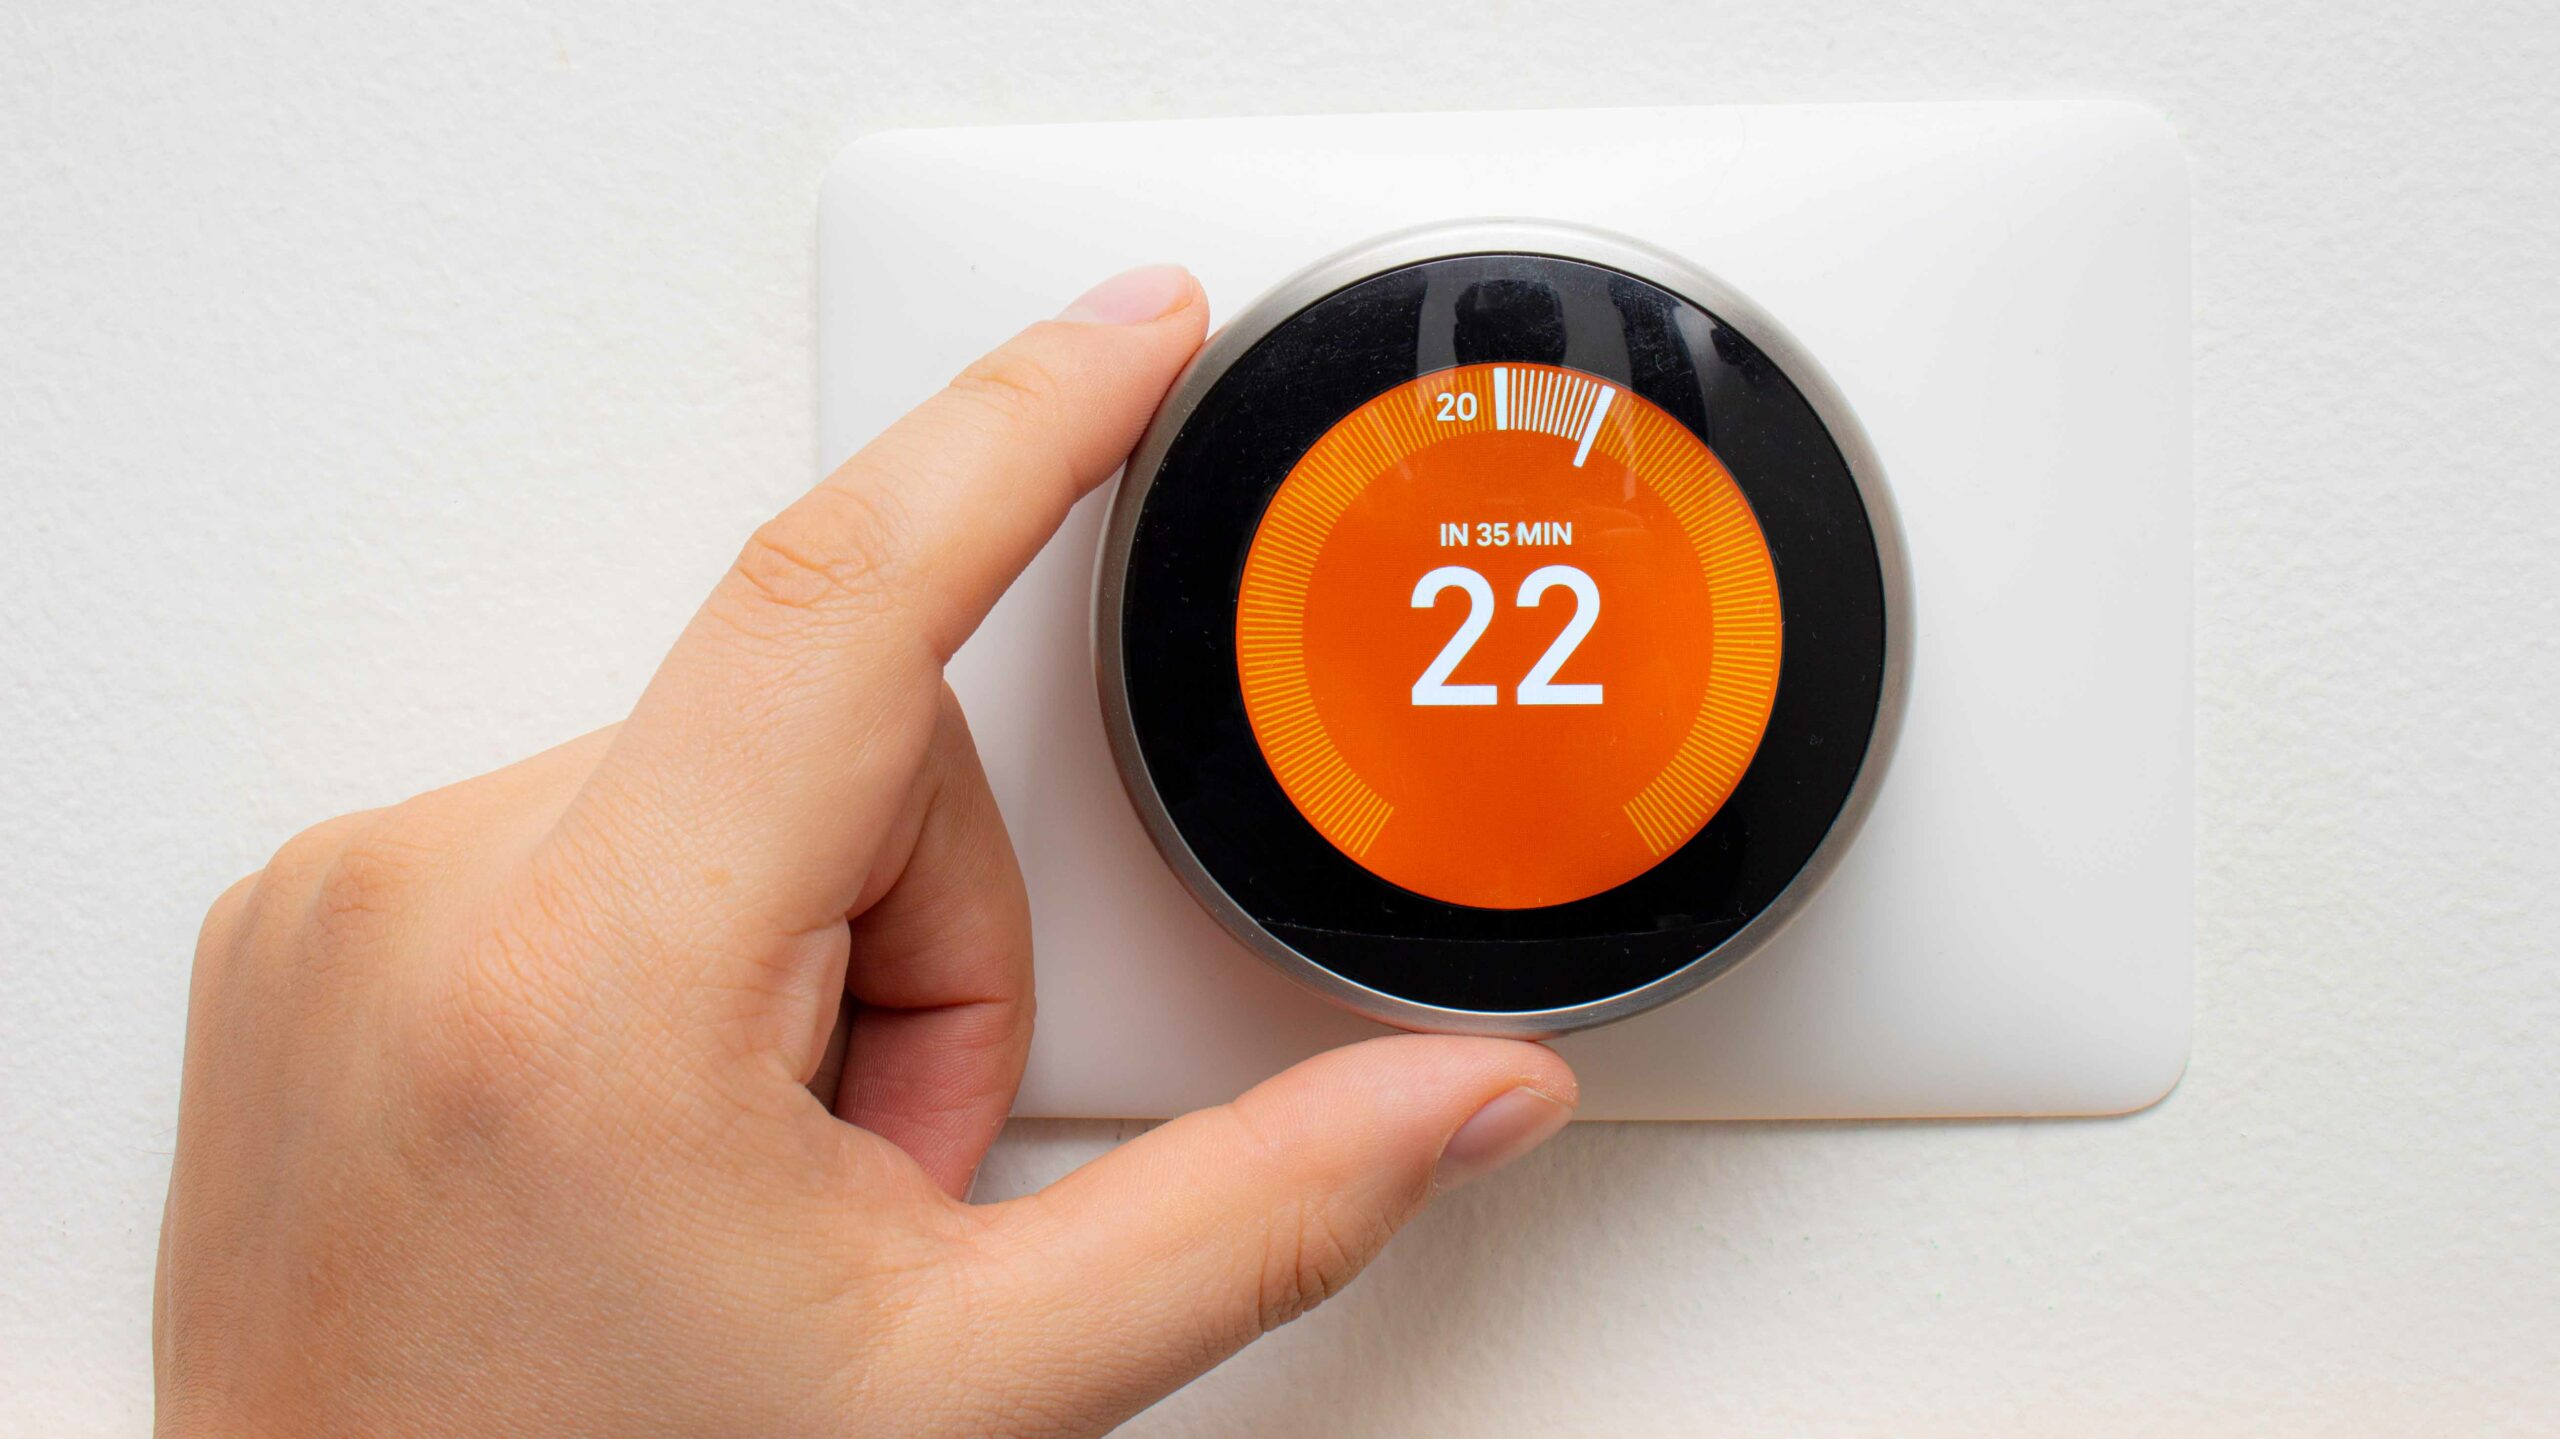 ontario-s-government-is-giving-smart-thermostat-users-75-through-new